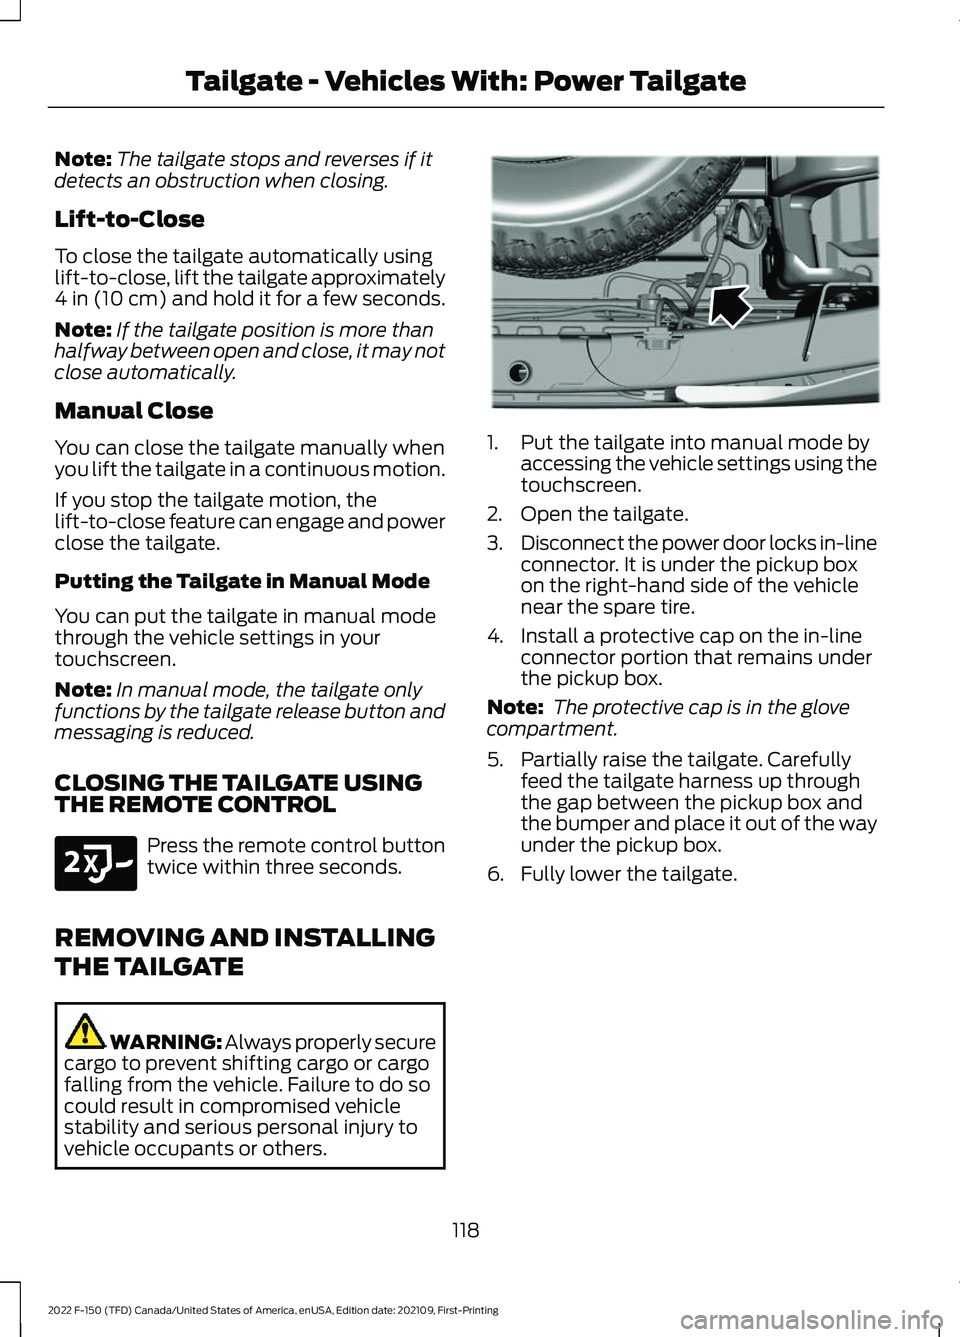 FORD F-150 2022  Owners Manual Note:
The tailgate stops and reverses if it
detects an obstruction when closing.
Lift-to-Close
To close the tailgate automatically using
lift-to-close, lift the tailgate approximately
4 in (10 cm) and